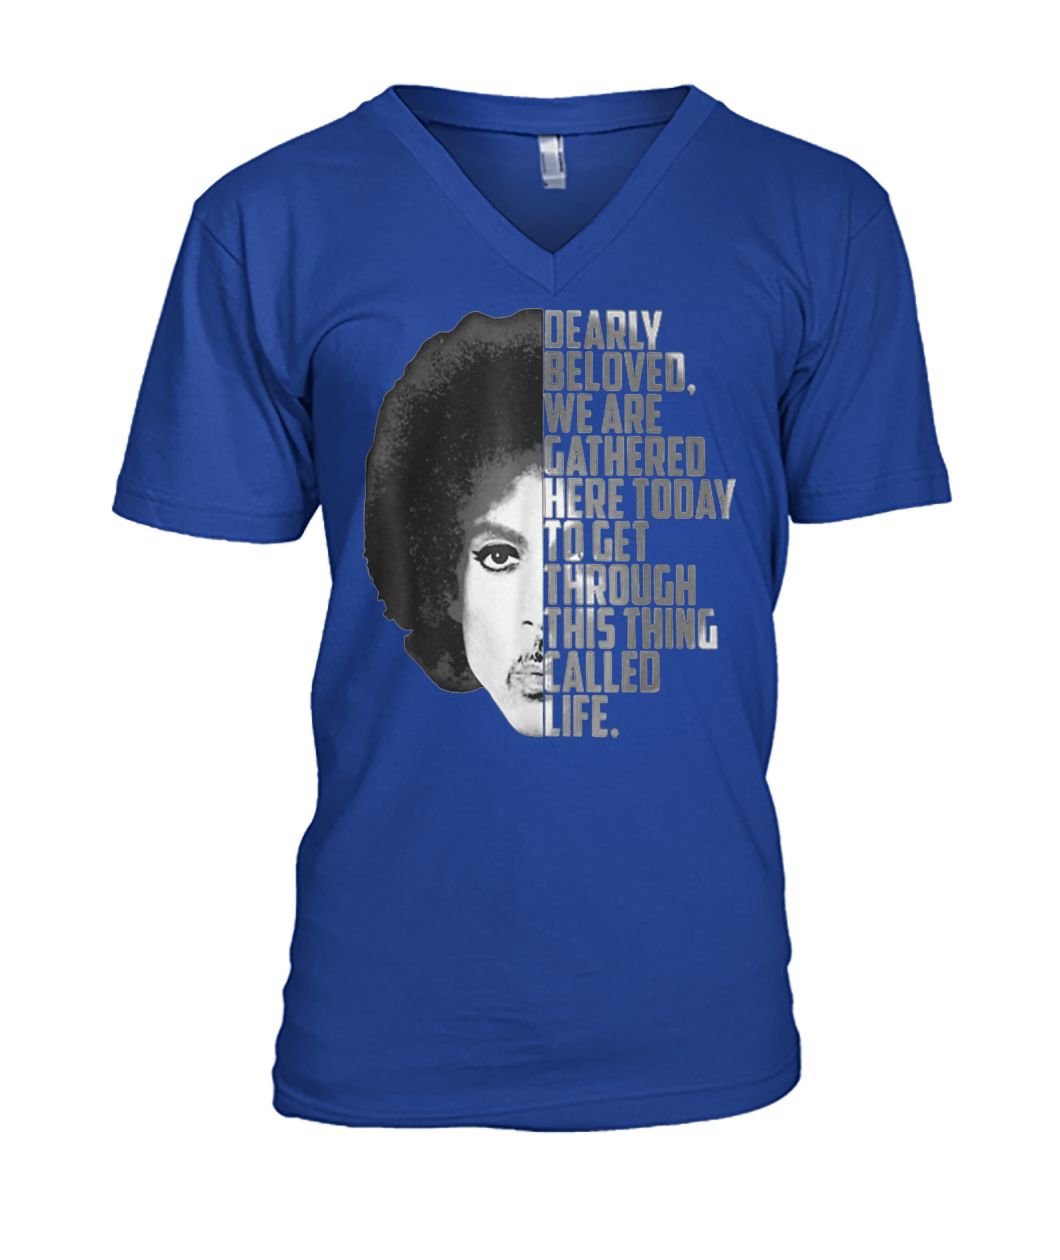 Dearly beloved we are gathered here today to get through this thing called life mens v-neck